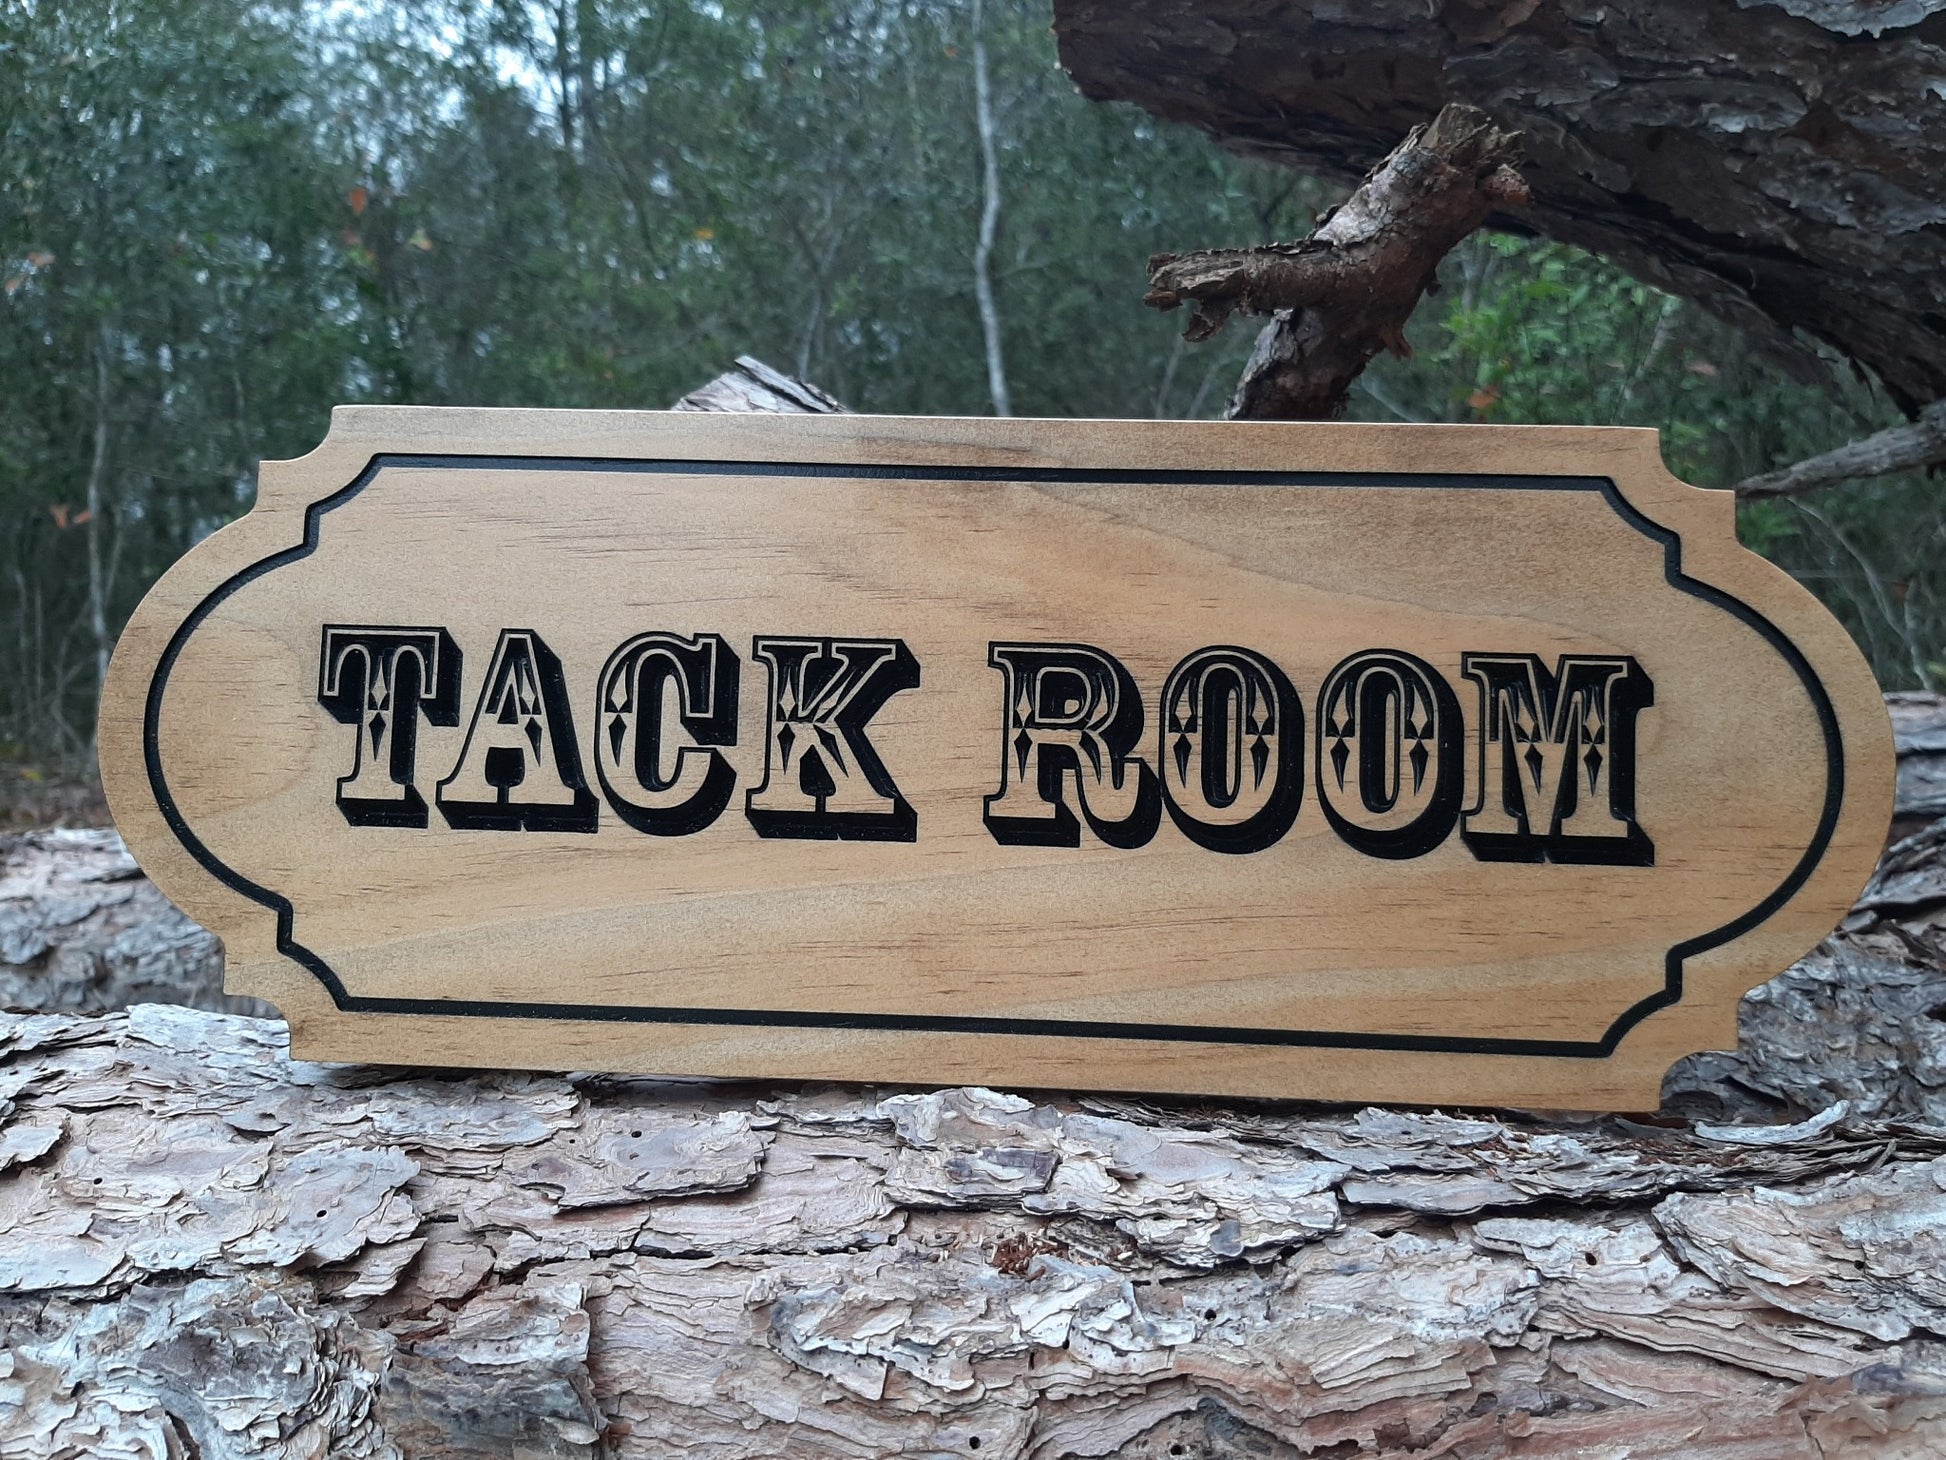 Wooden Tack Room Feed Room door signs made in the USA.